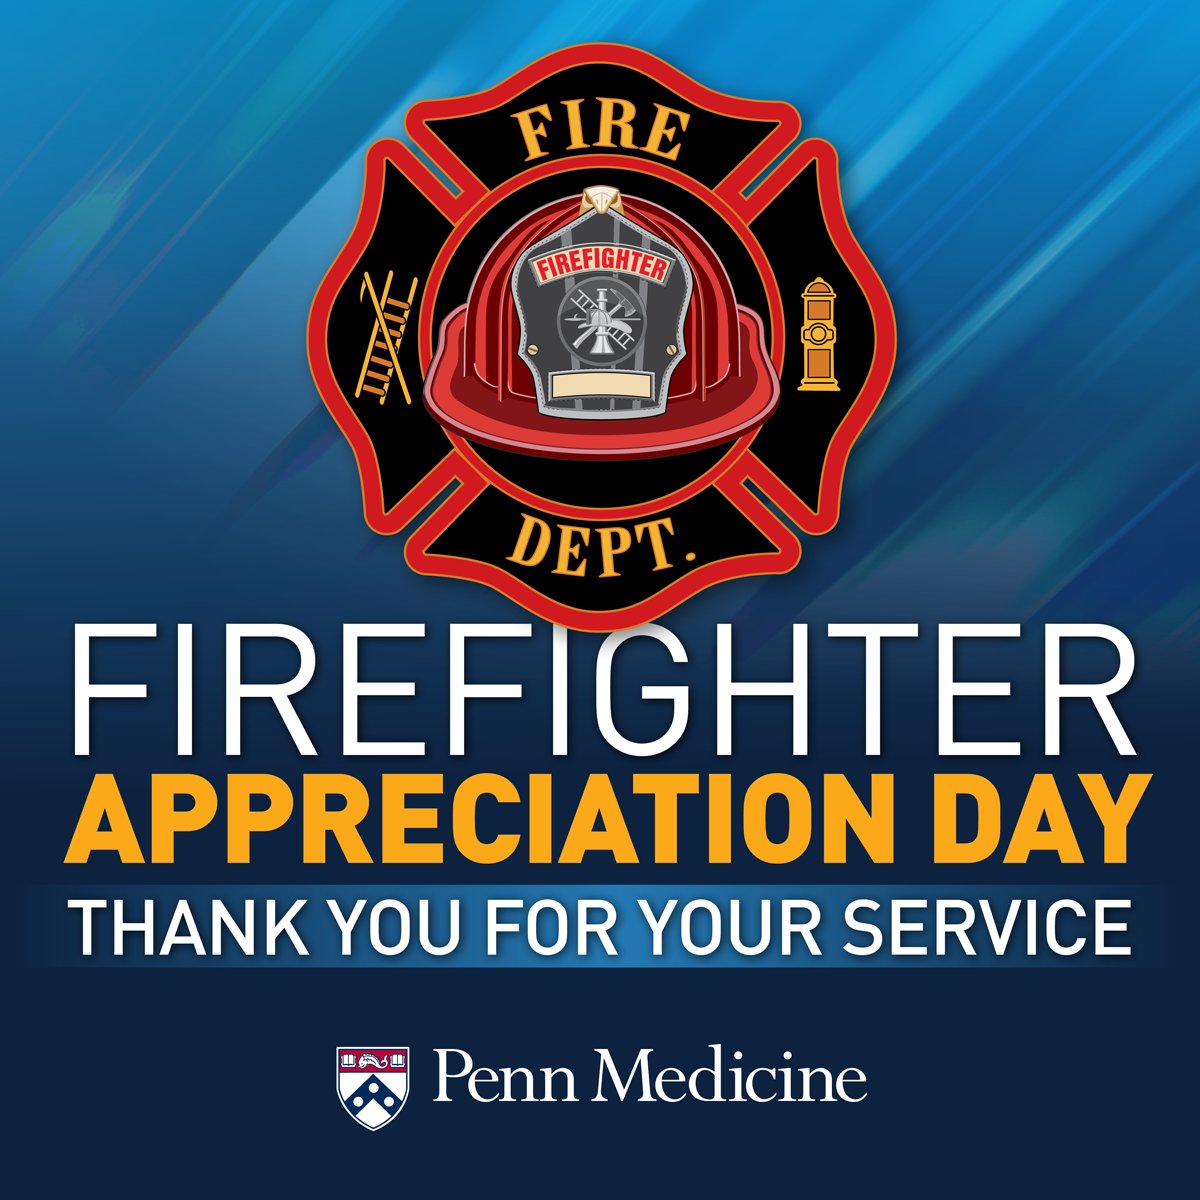 This #FireFighterAppreciationDay, we thank the firefighters who have dedicated themselves to serving our community and honor those who have fallen in the line of duty. Tag a firefighter or local fire company in the comments to show your appreciation!